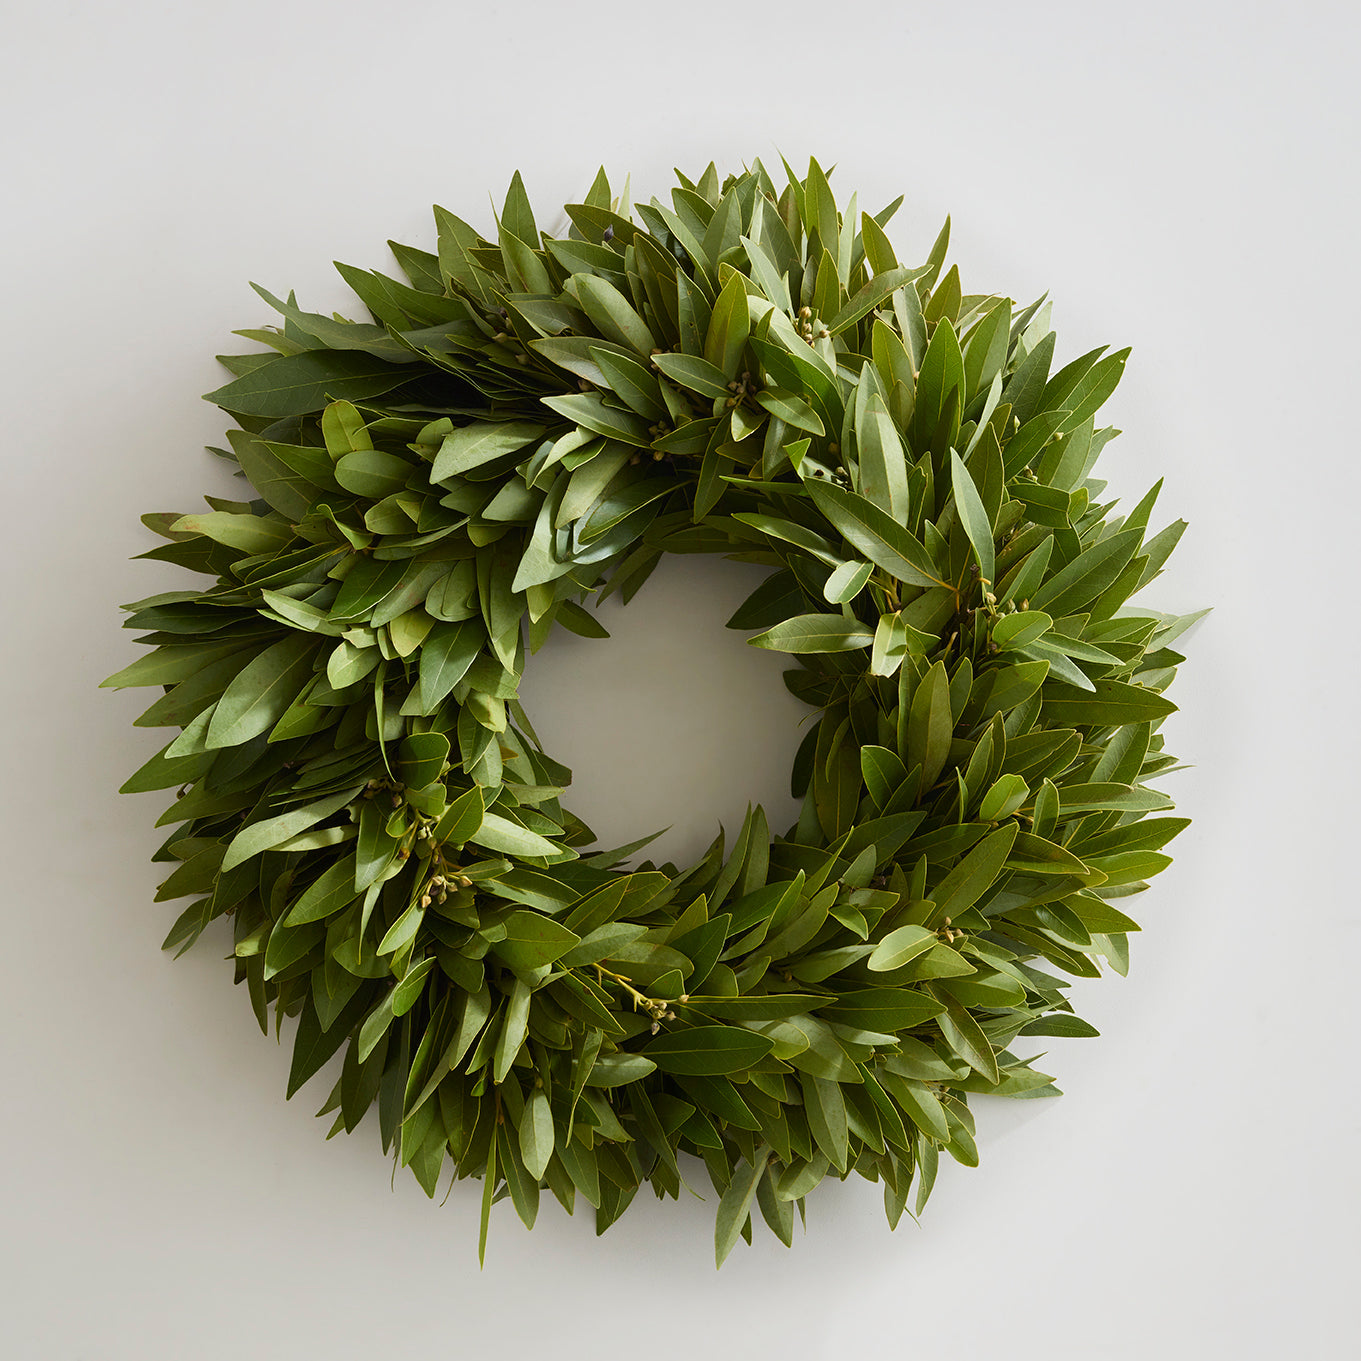 All Year Round Wreaths for Your Front Door, by Dianne Decor